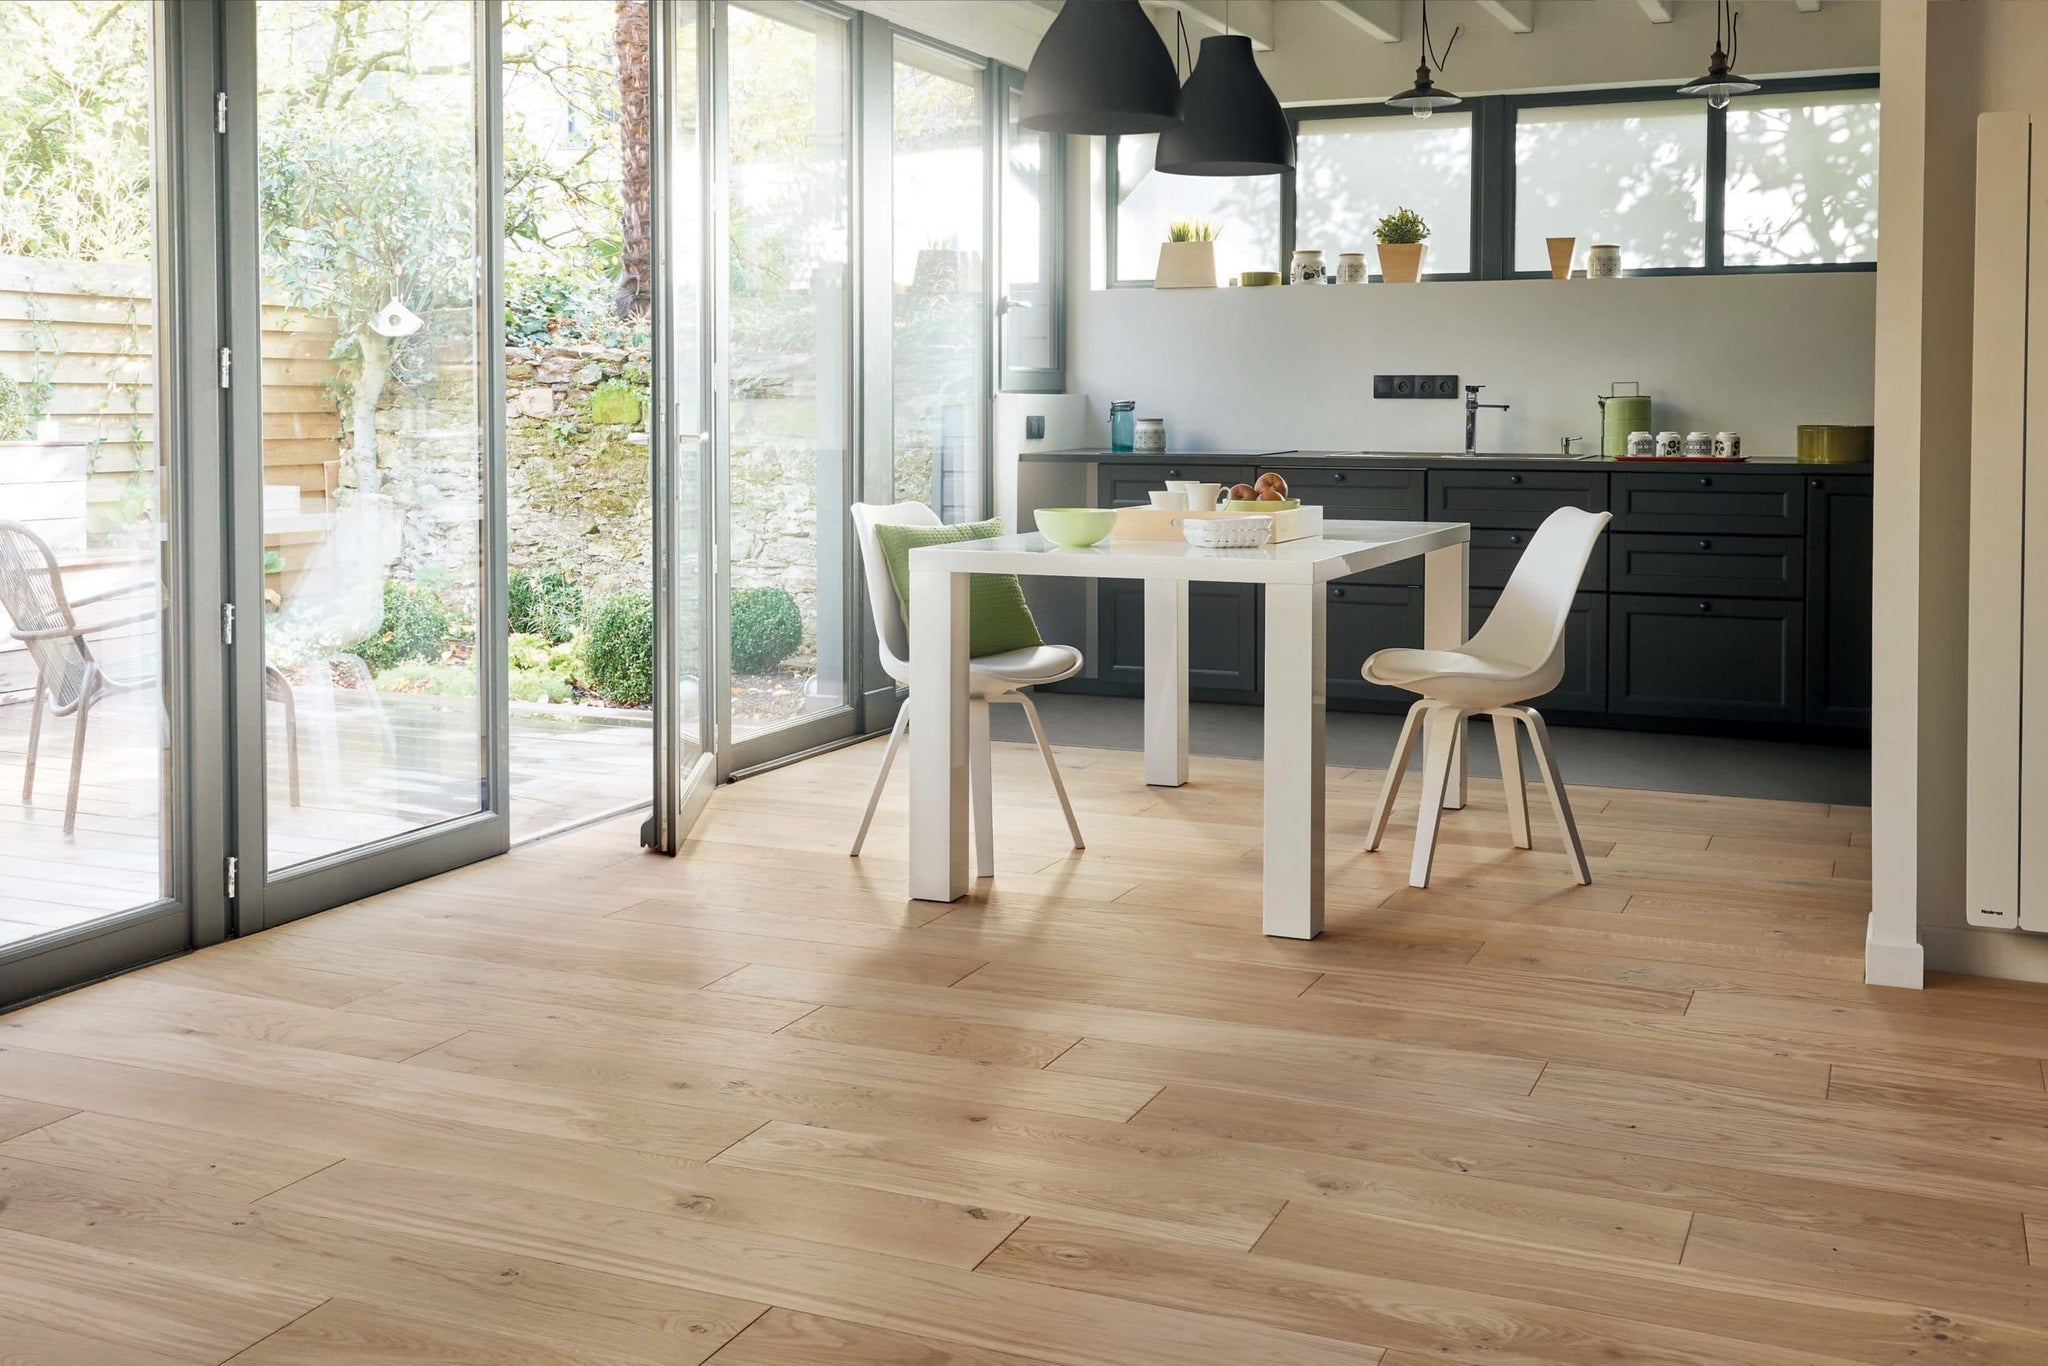 Compare Different Types of Flooring Options